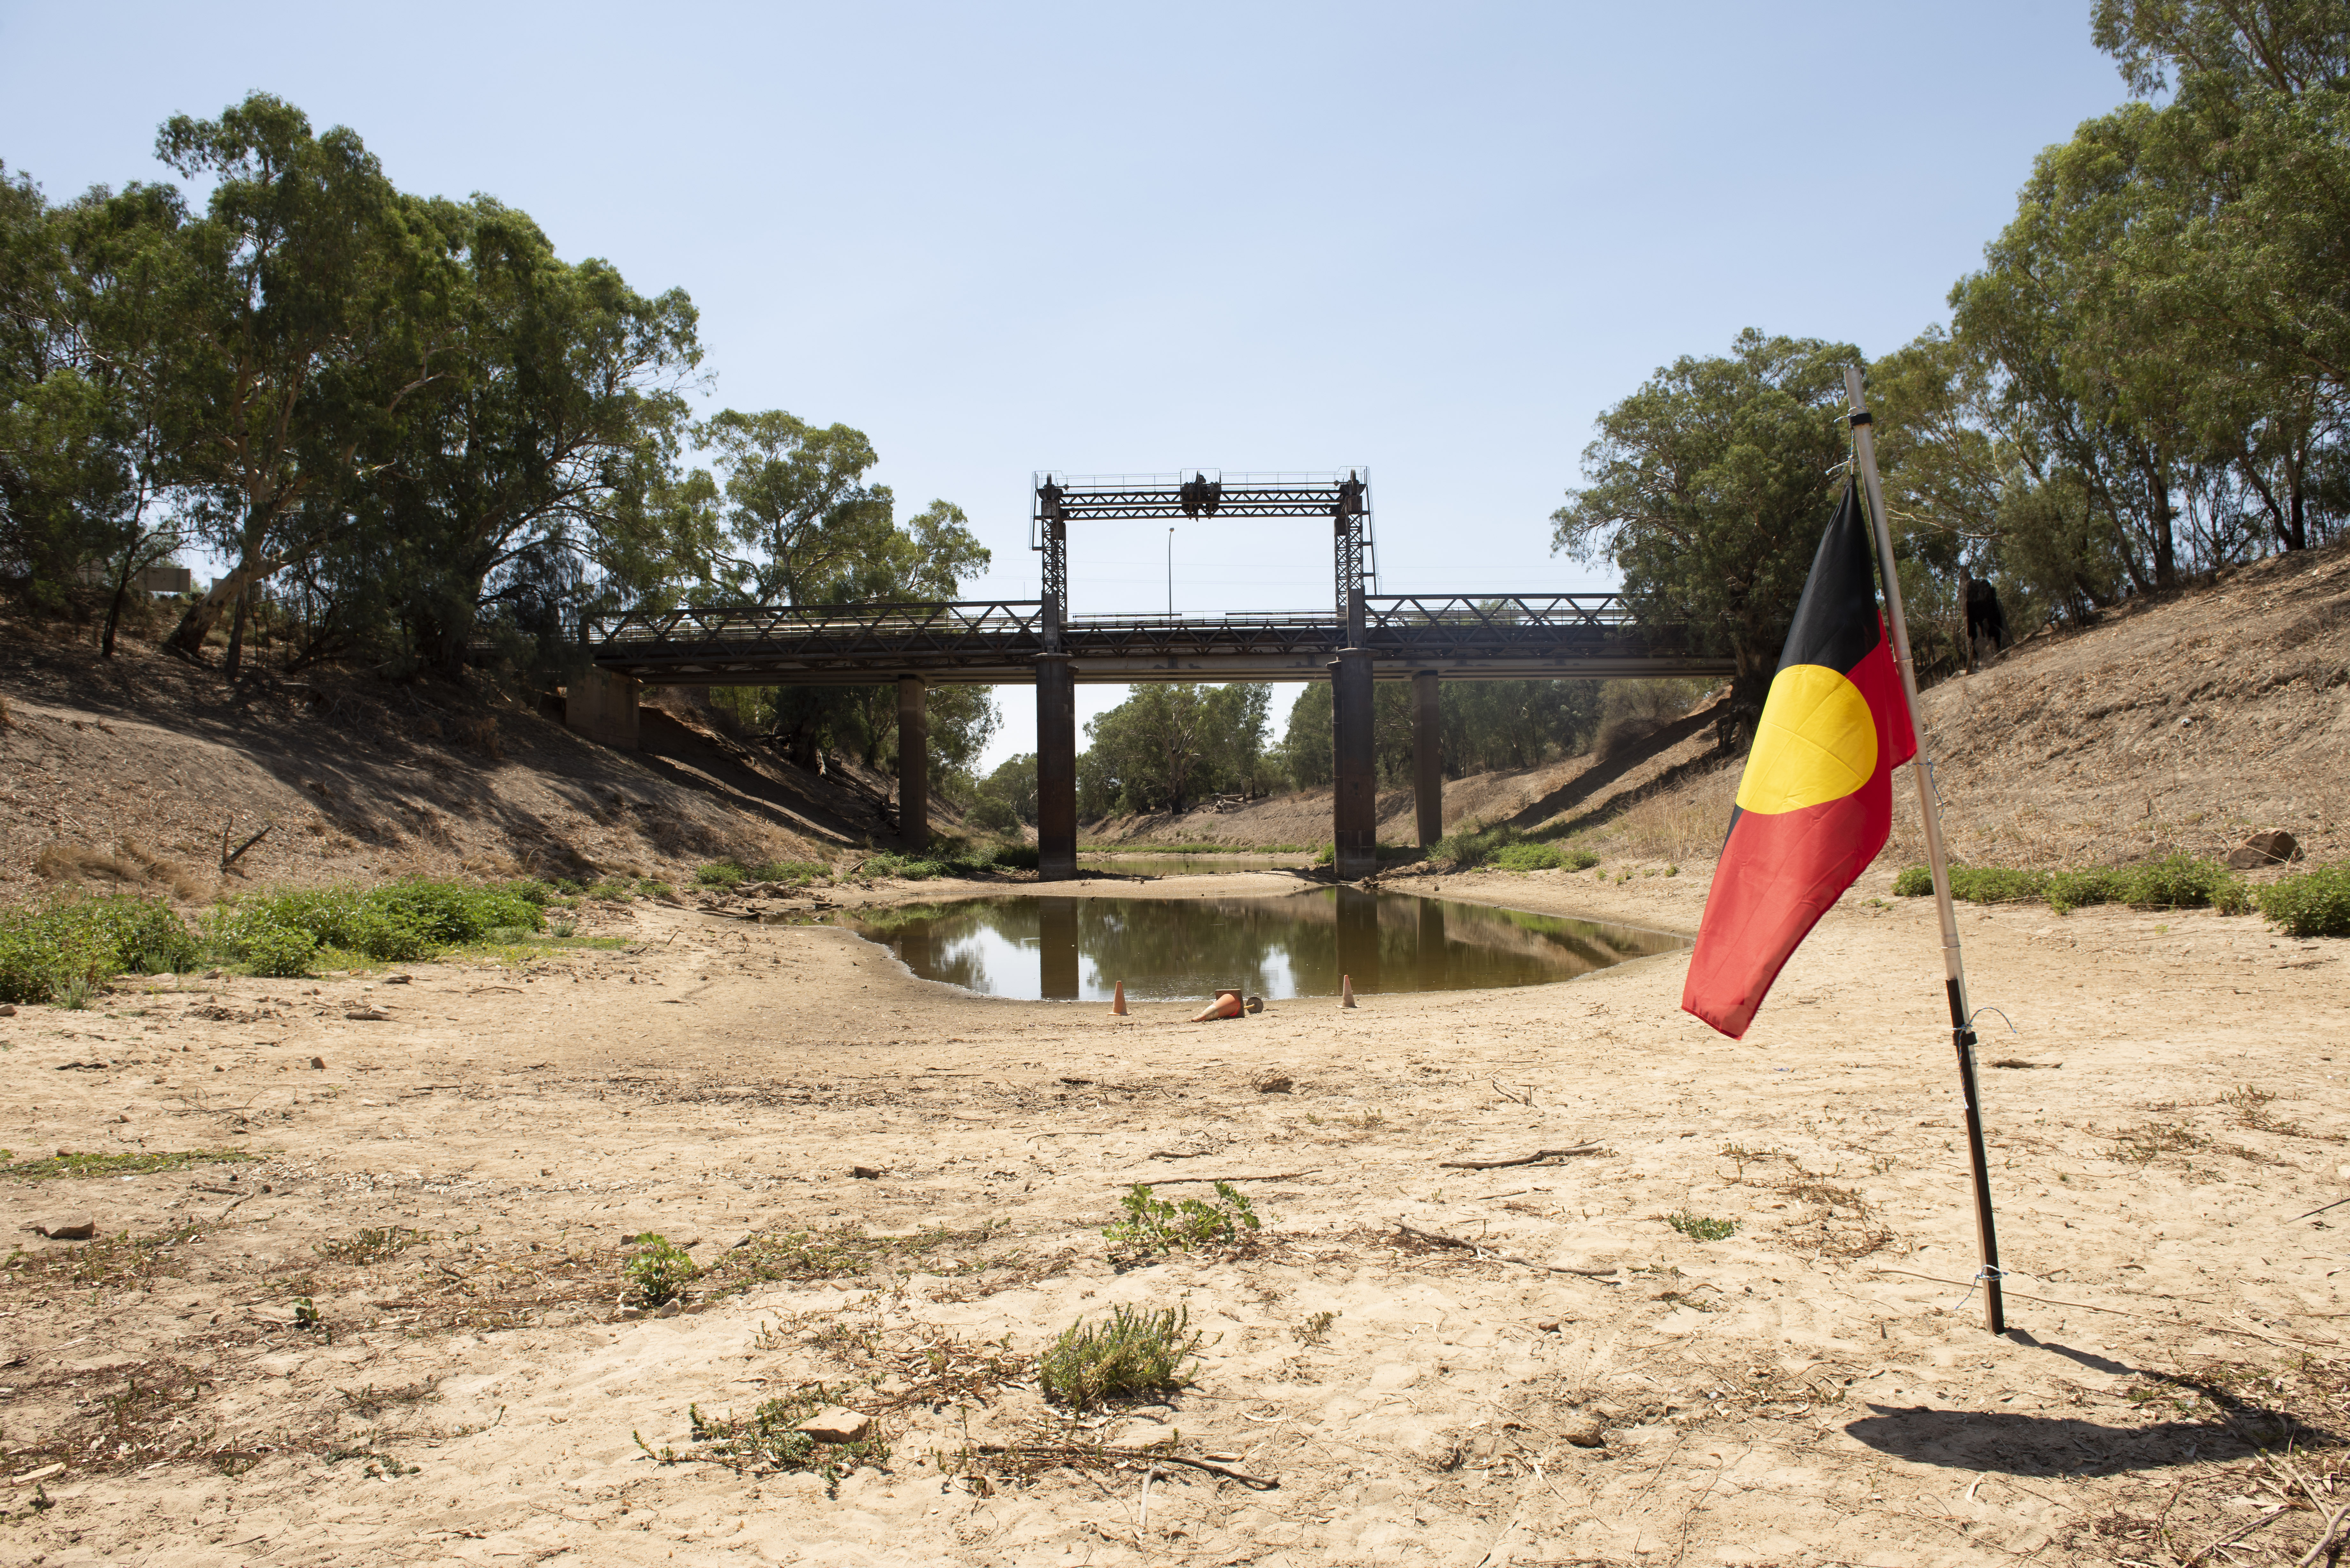 An Aboriginal flag is planted in a dry riverbed 